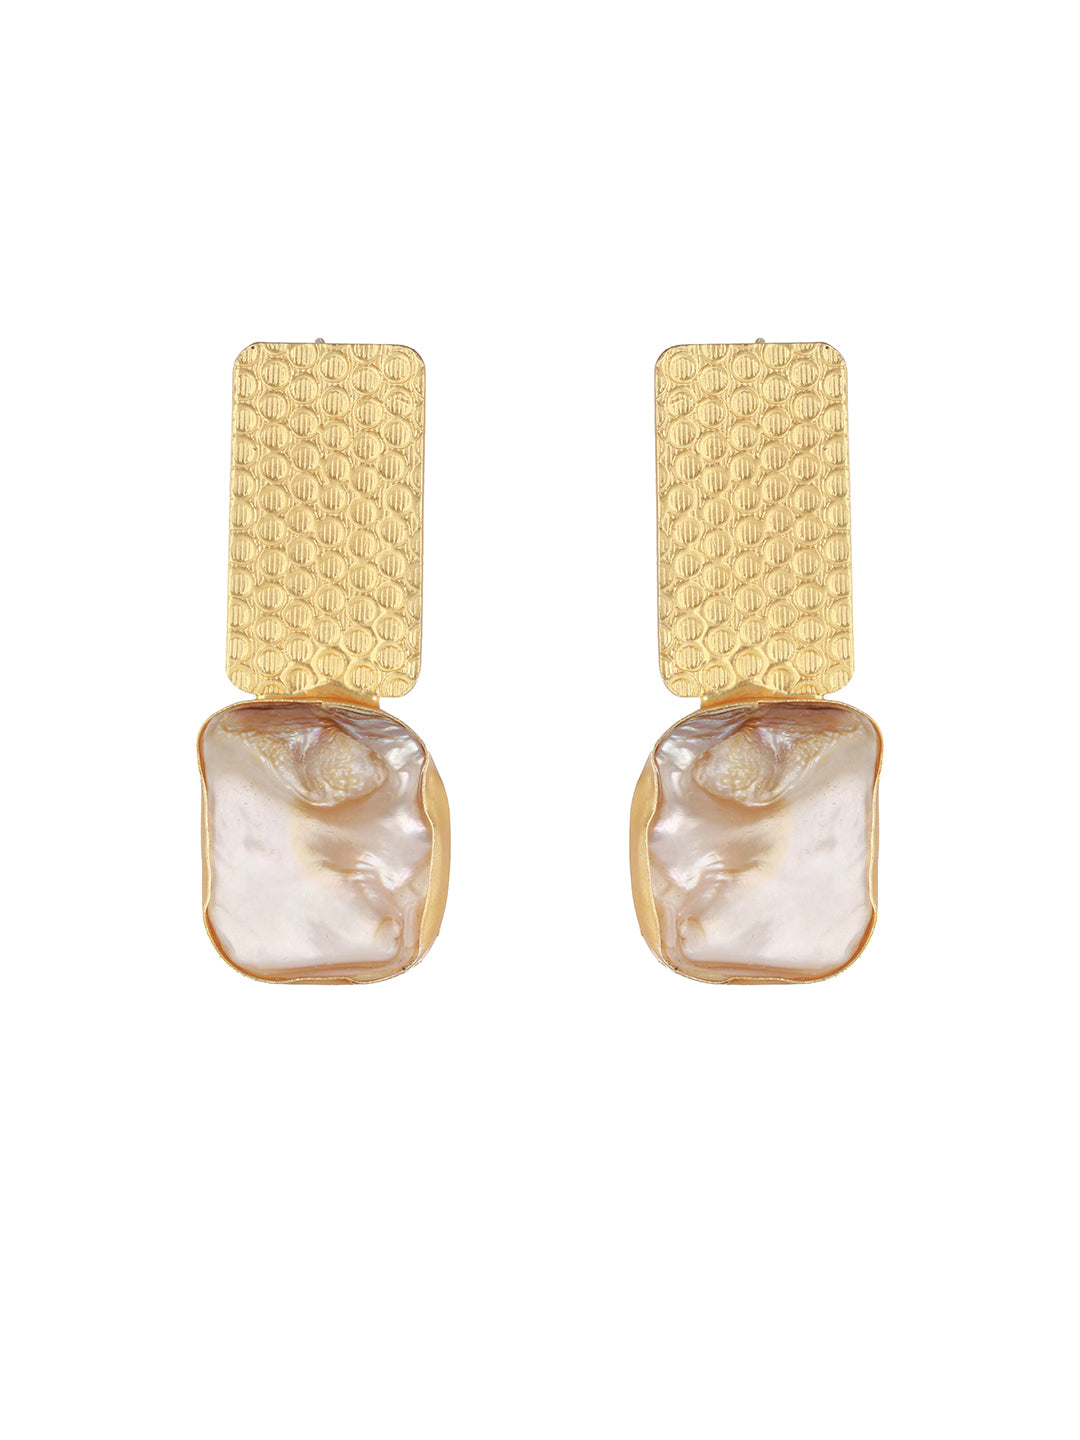 Priyaasi White Stone-Studded Textured Gold-Plated Drop Earrings